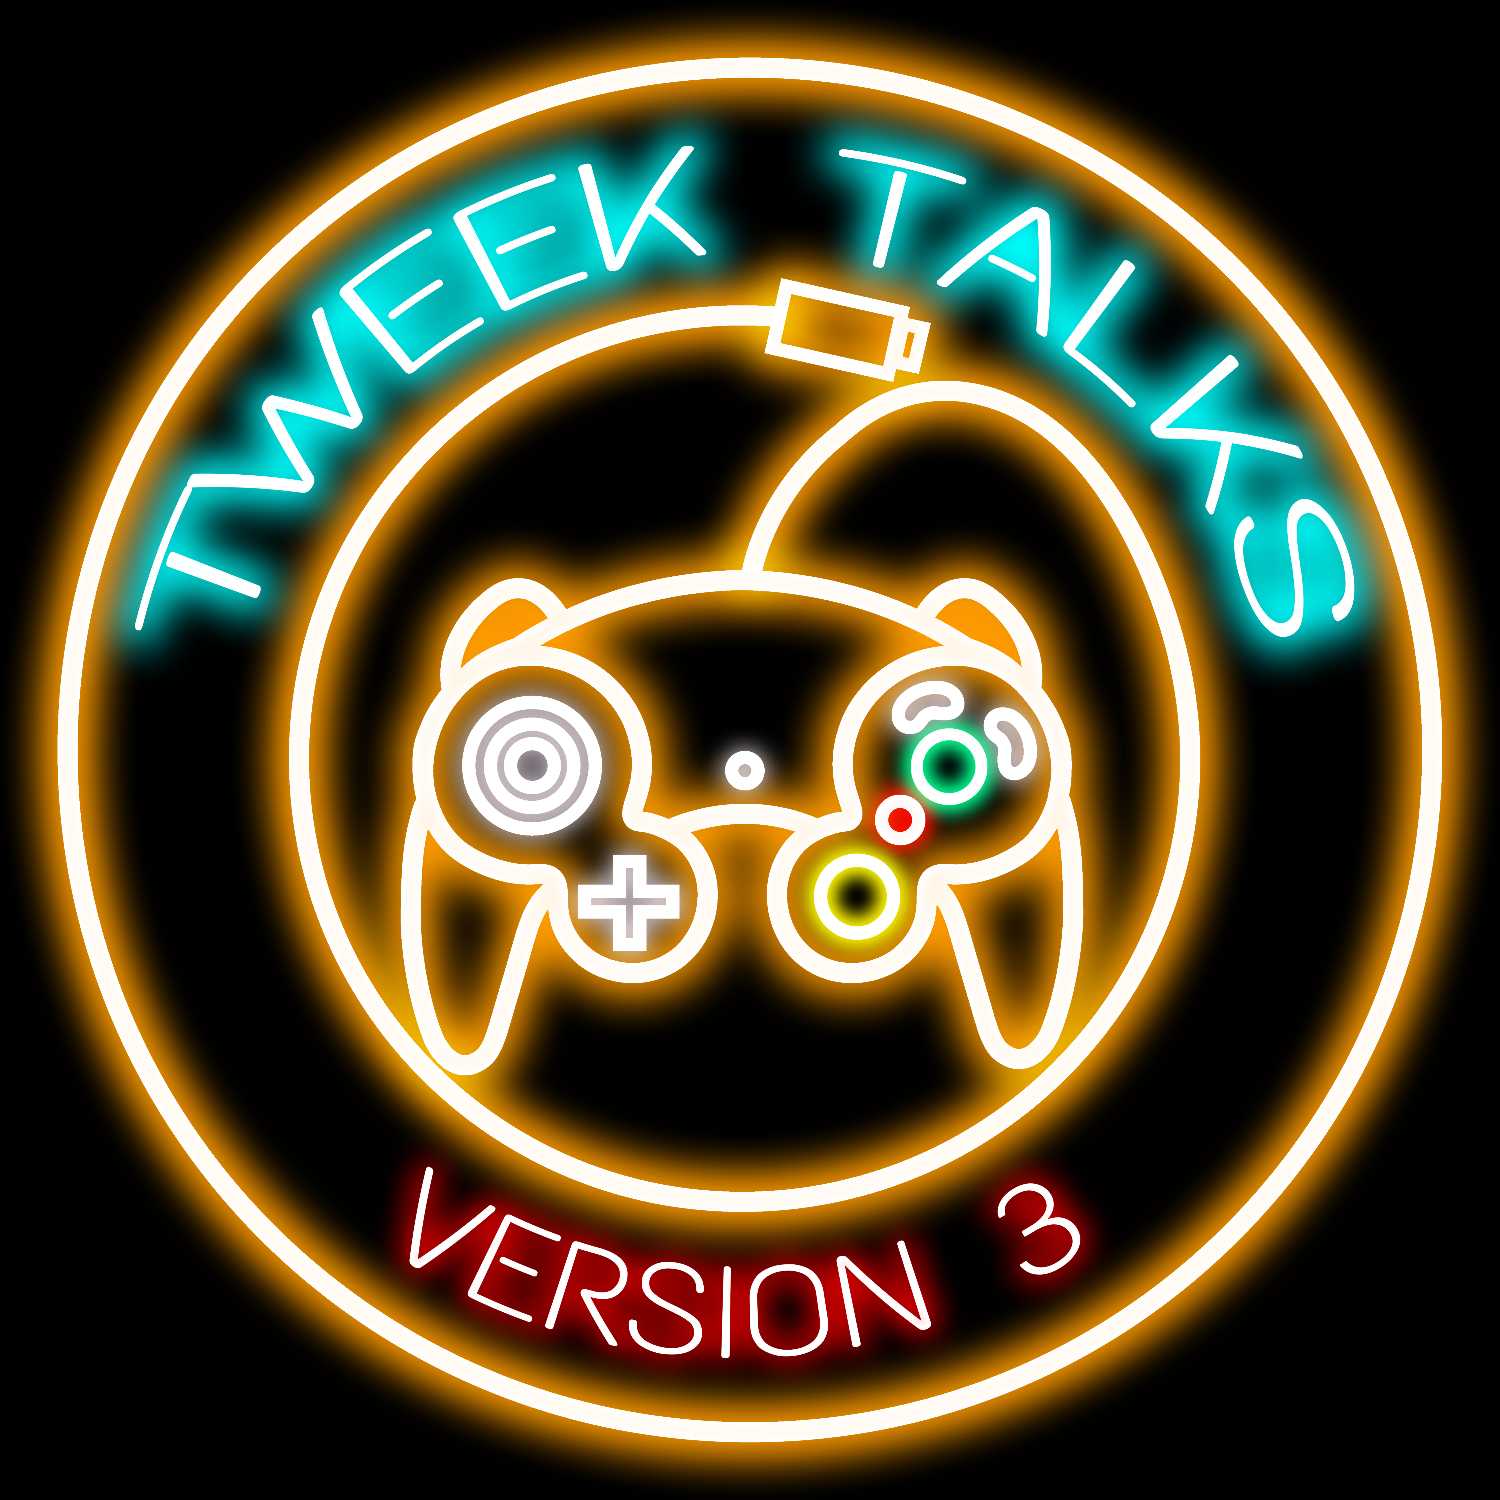 Tweek Talks about Character Crisis, Coinbox IRL, and More! Episode 132